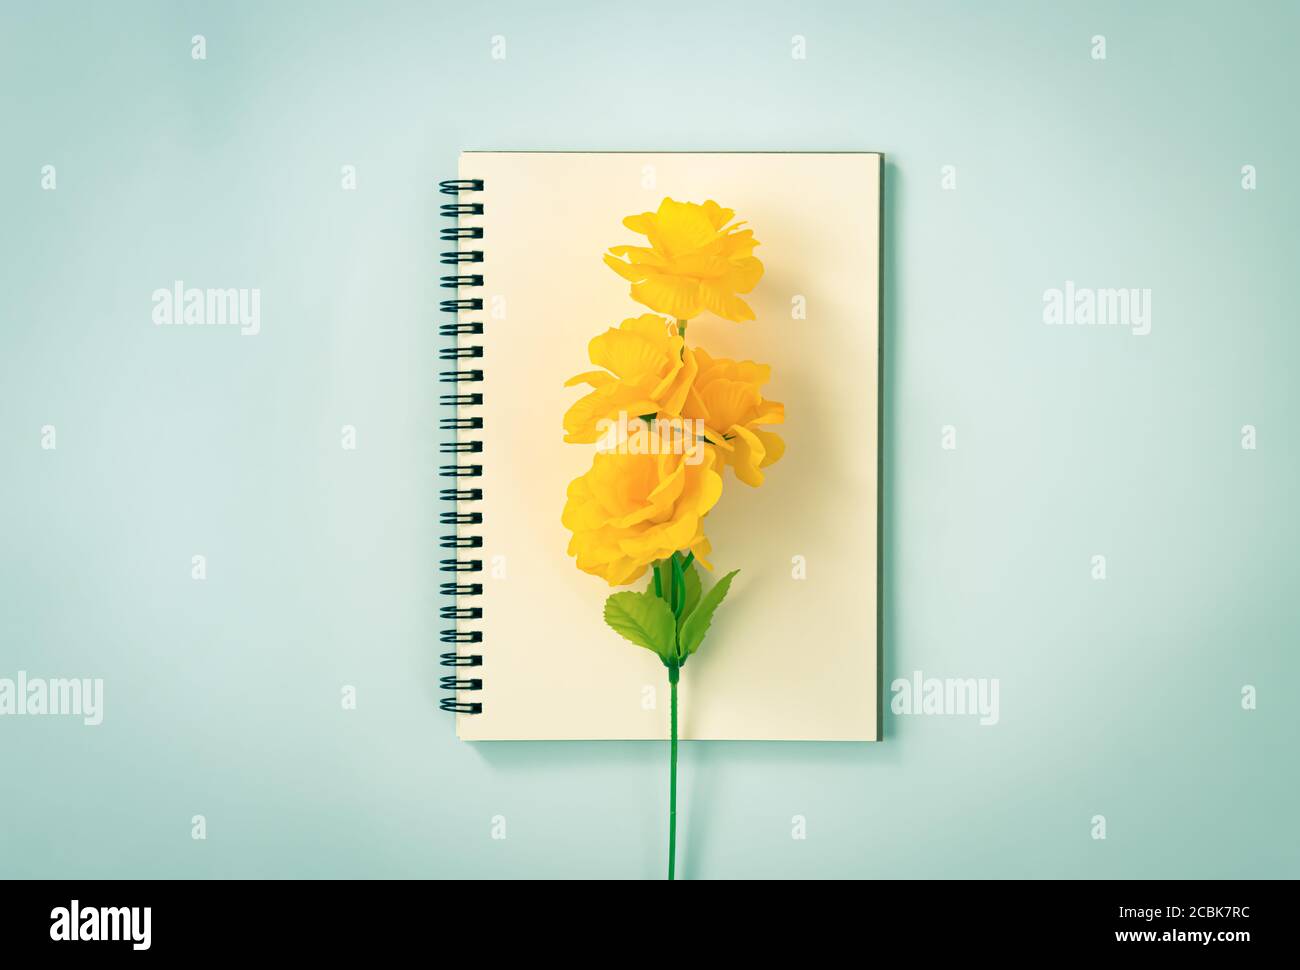 Spiral Notebook or Spring Notebook in Unlined Type and Orange Flowers at Center on Blue Pastel Minimalist Background. Spiral Notebook Mockup on Center Stock Photo